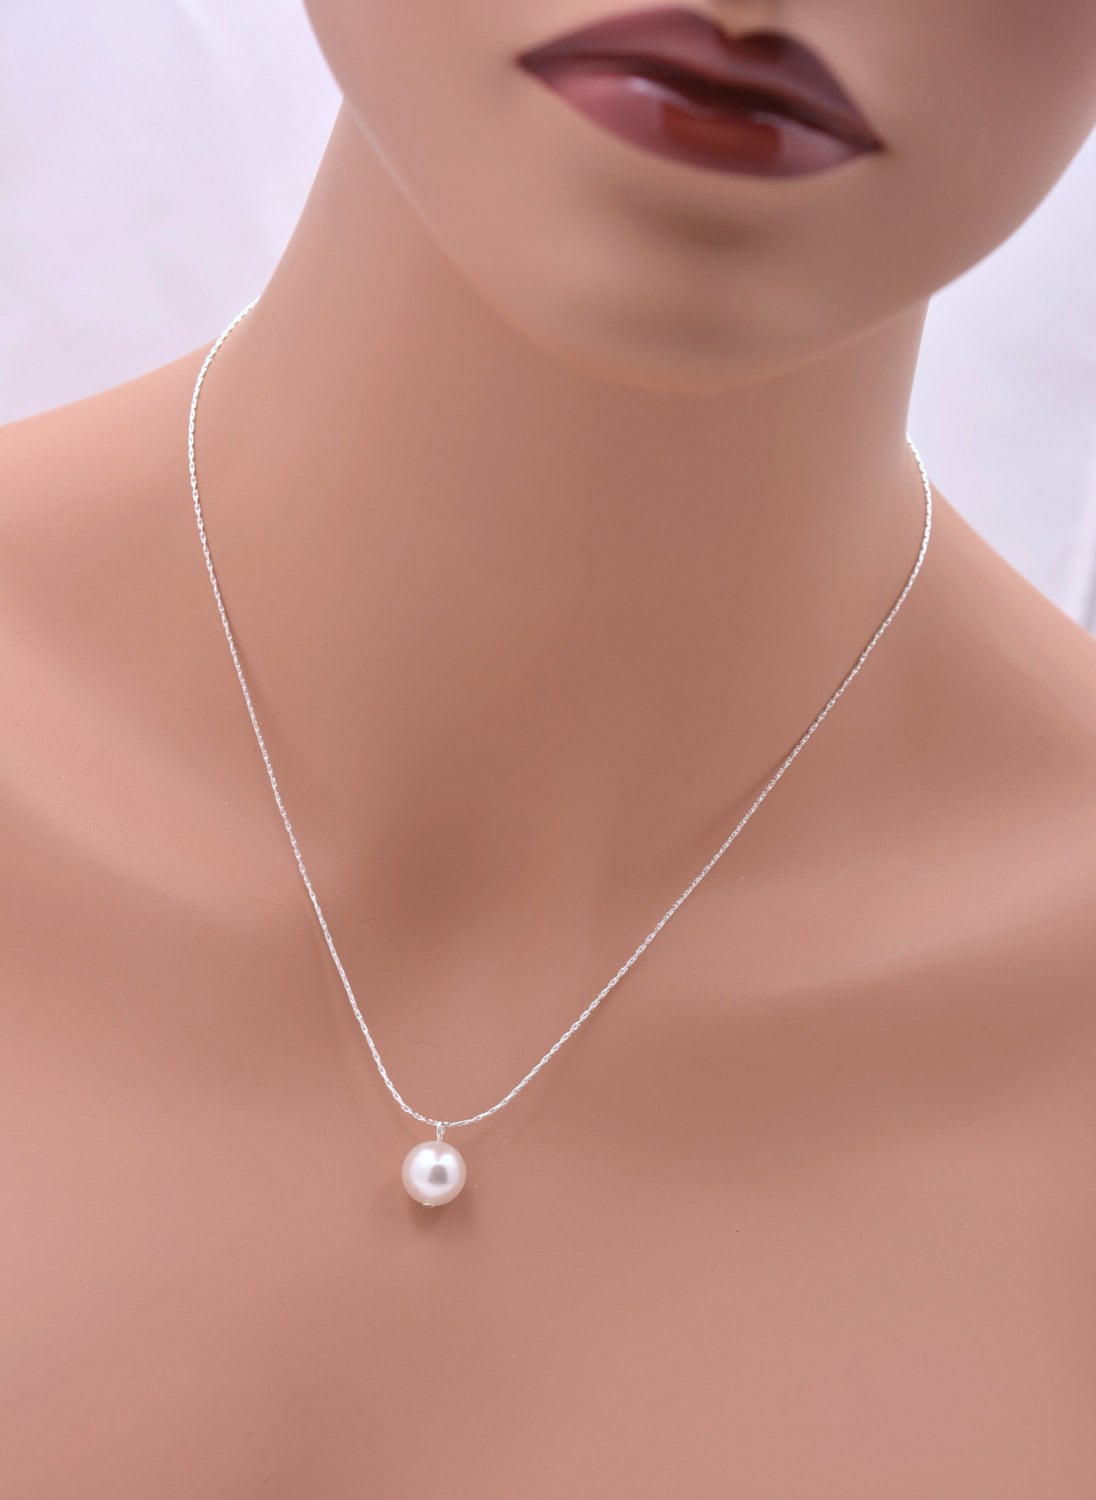 One Pearl Necklace Single Pearl Pendant Bridesmaid Pearl